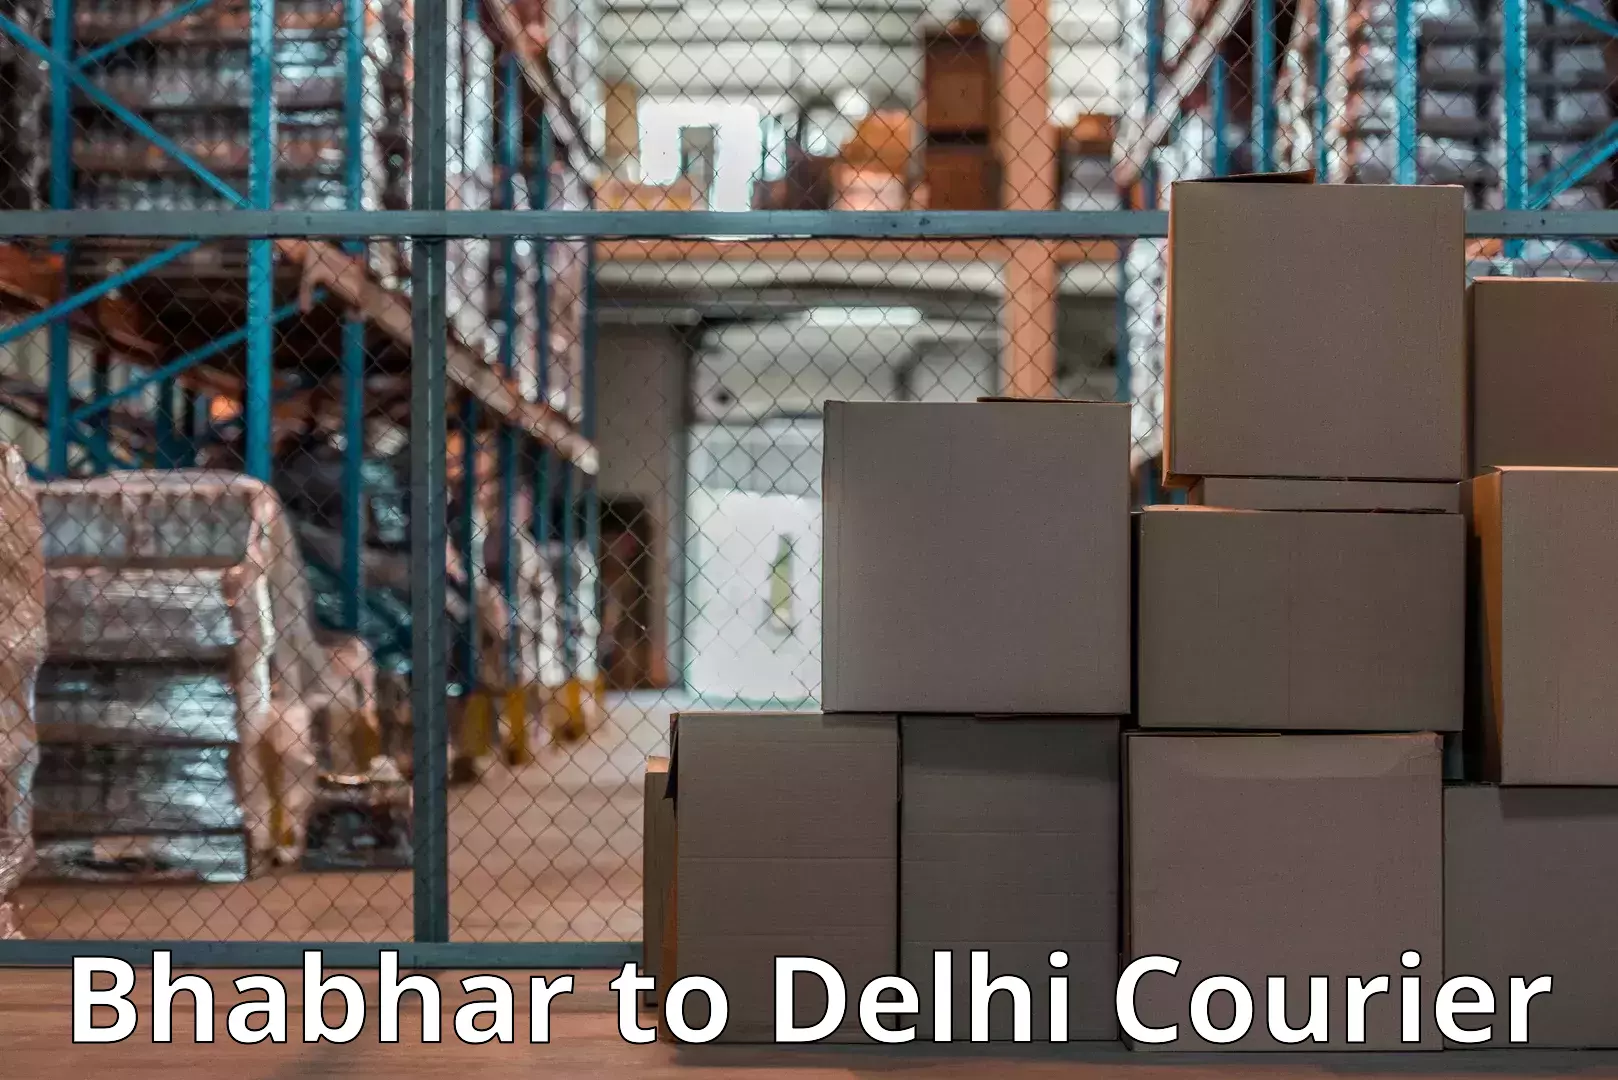 Quality relocation assistance Bhabhar to Lodhi Road